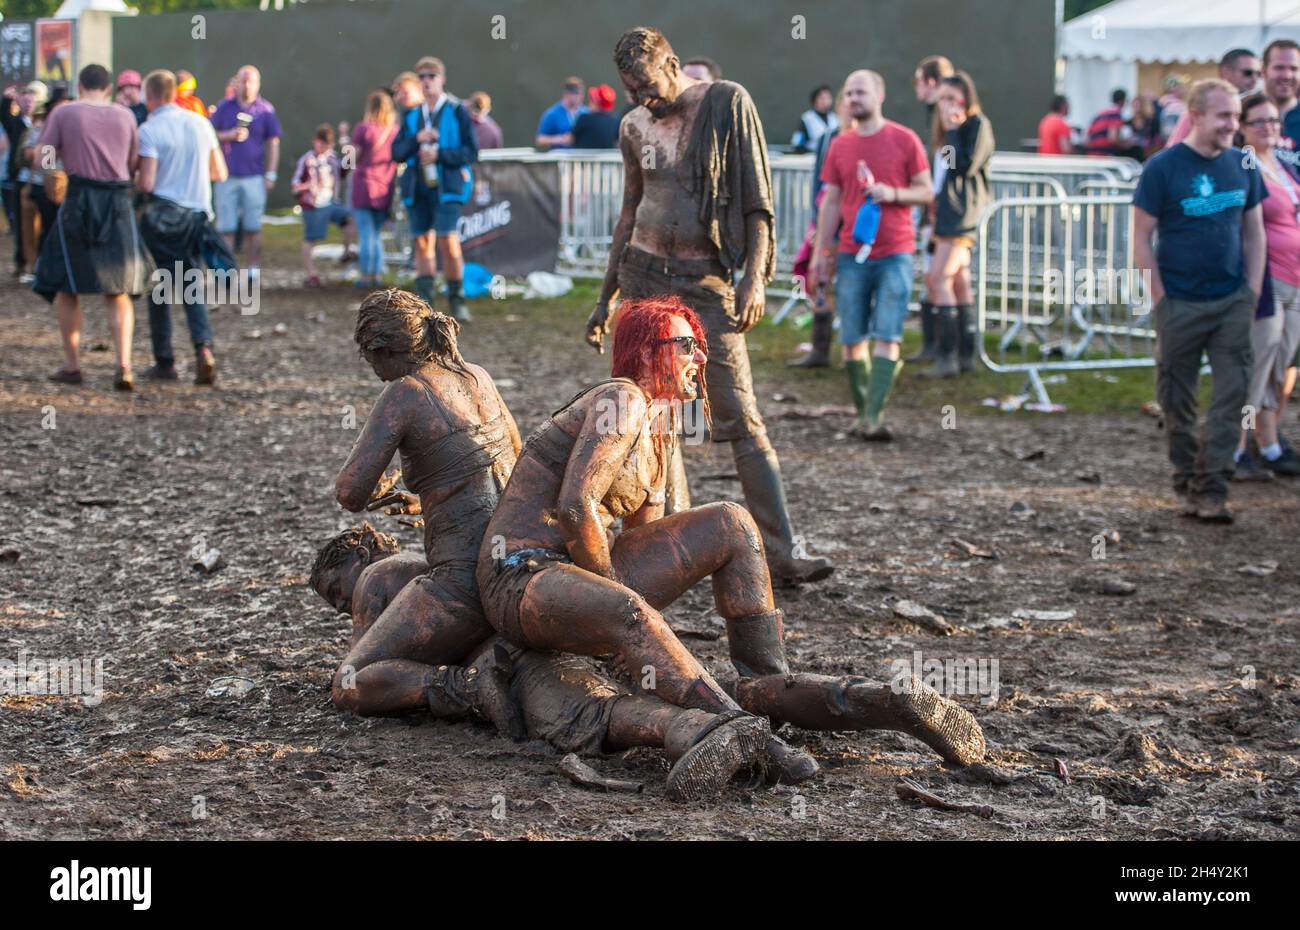 Festival goers wrestling in the mud on day 2 of V Festival on August 23 2015 at Weston Park, Staffordshire, UK Stock Photo